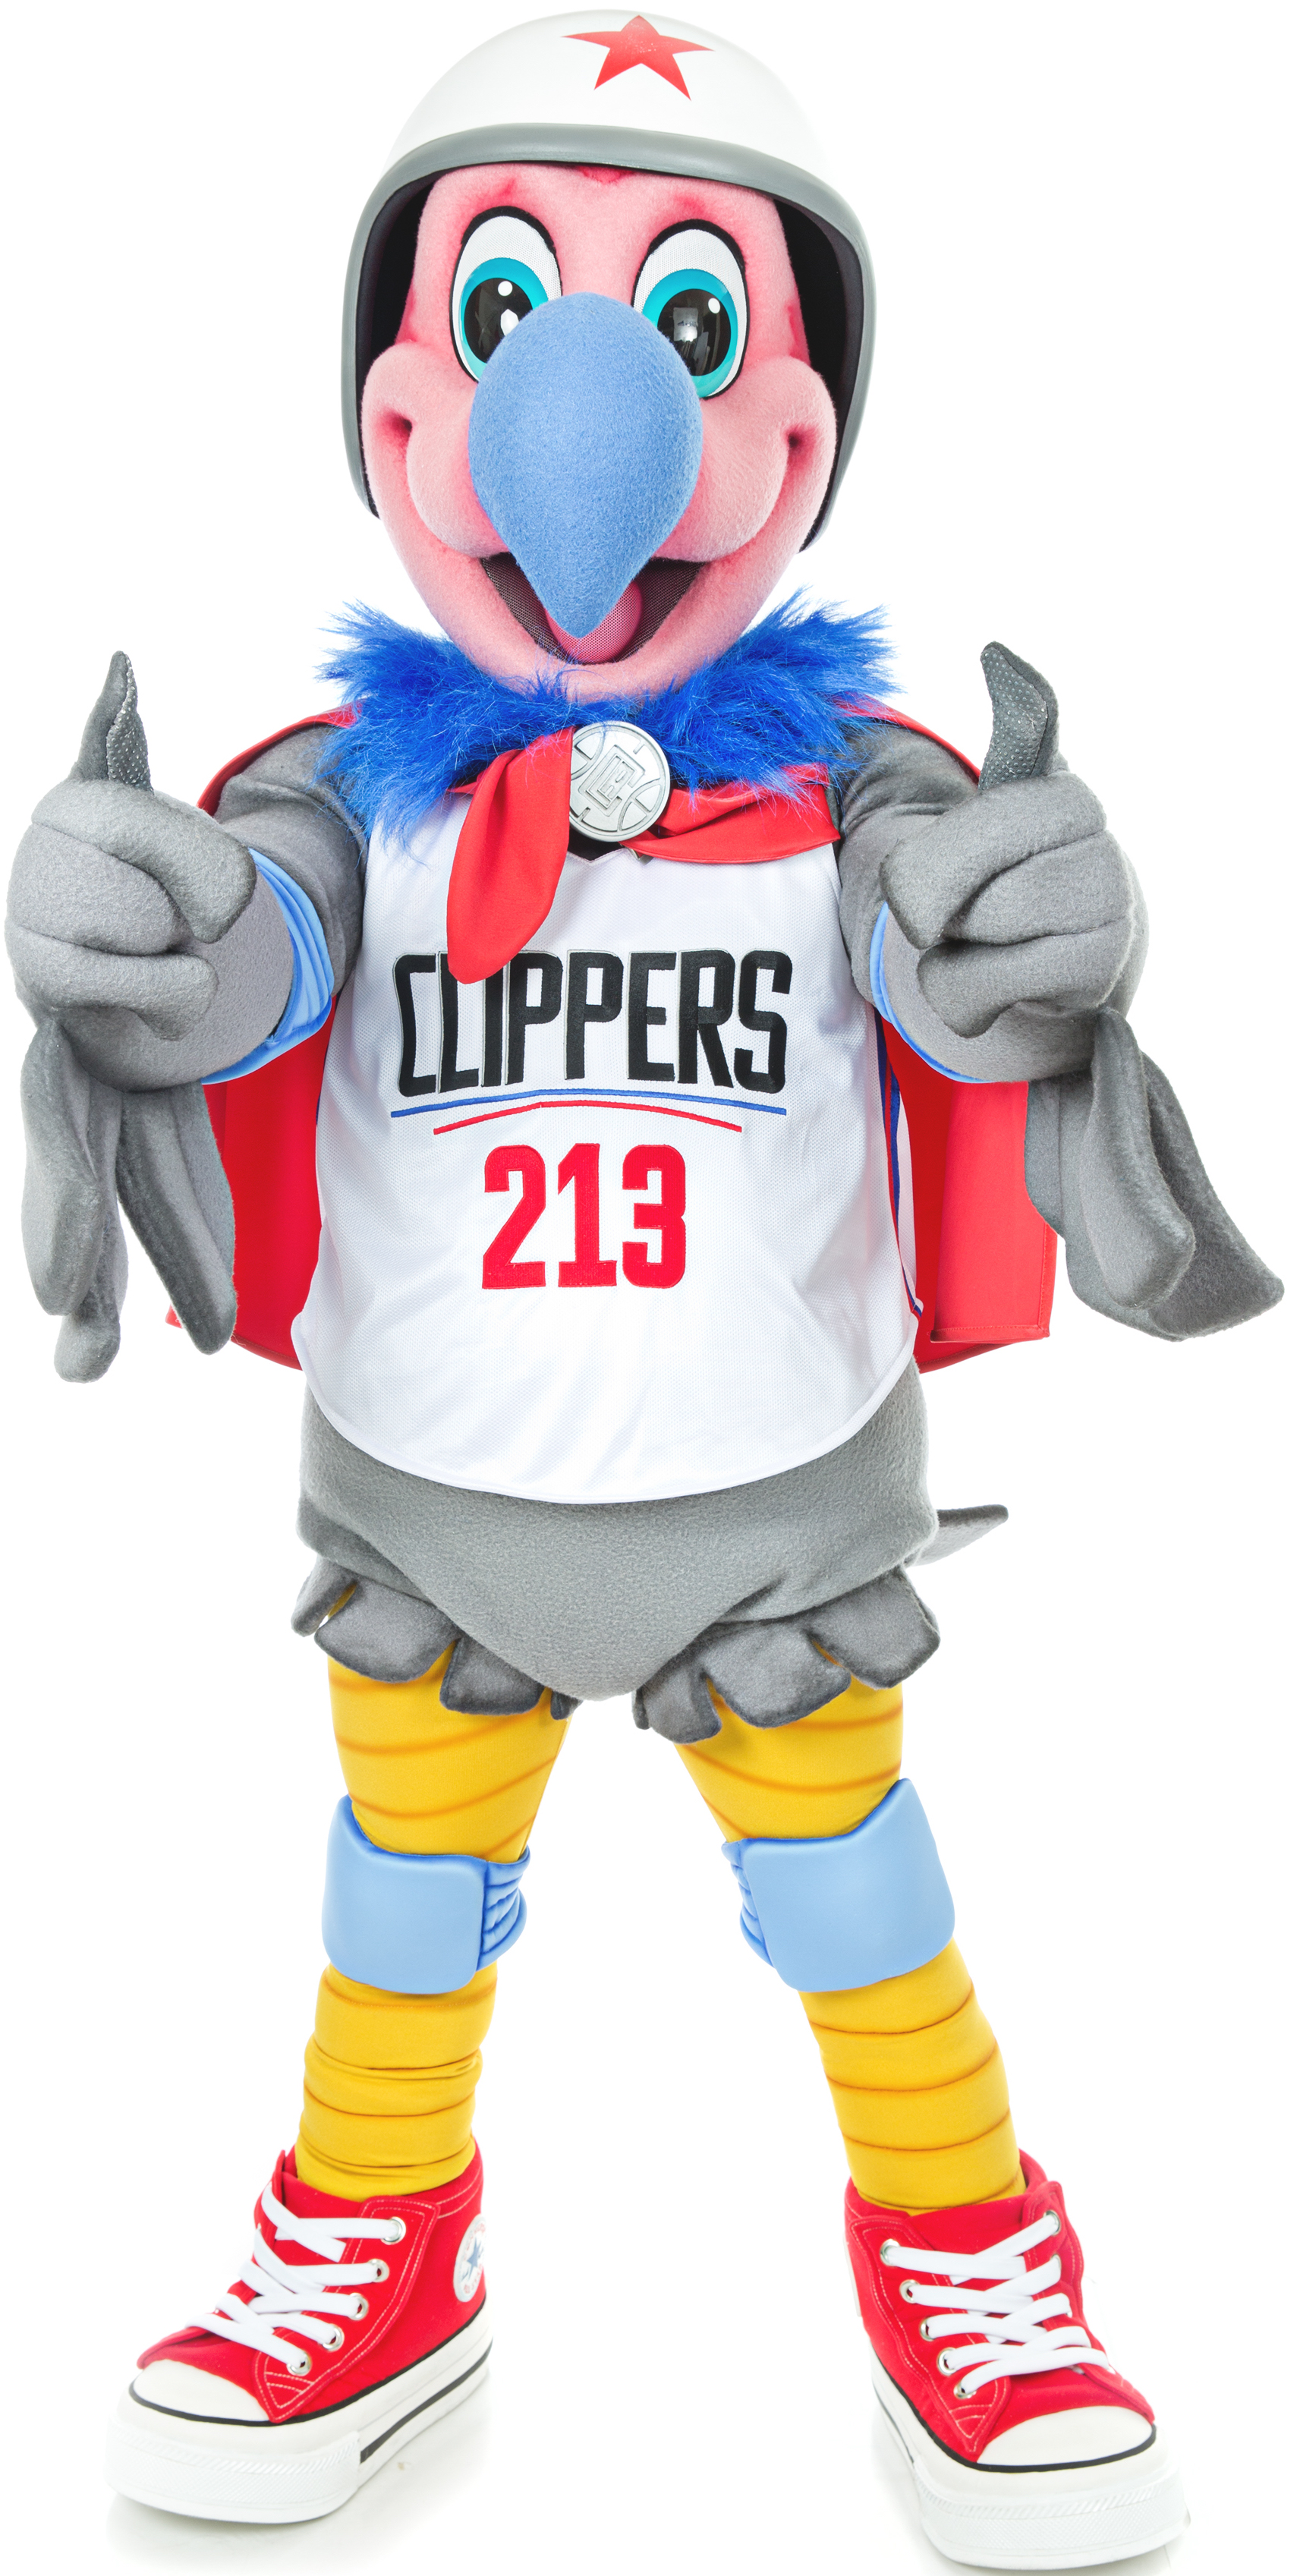 Los Angeles Clippers - Wikipedia